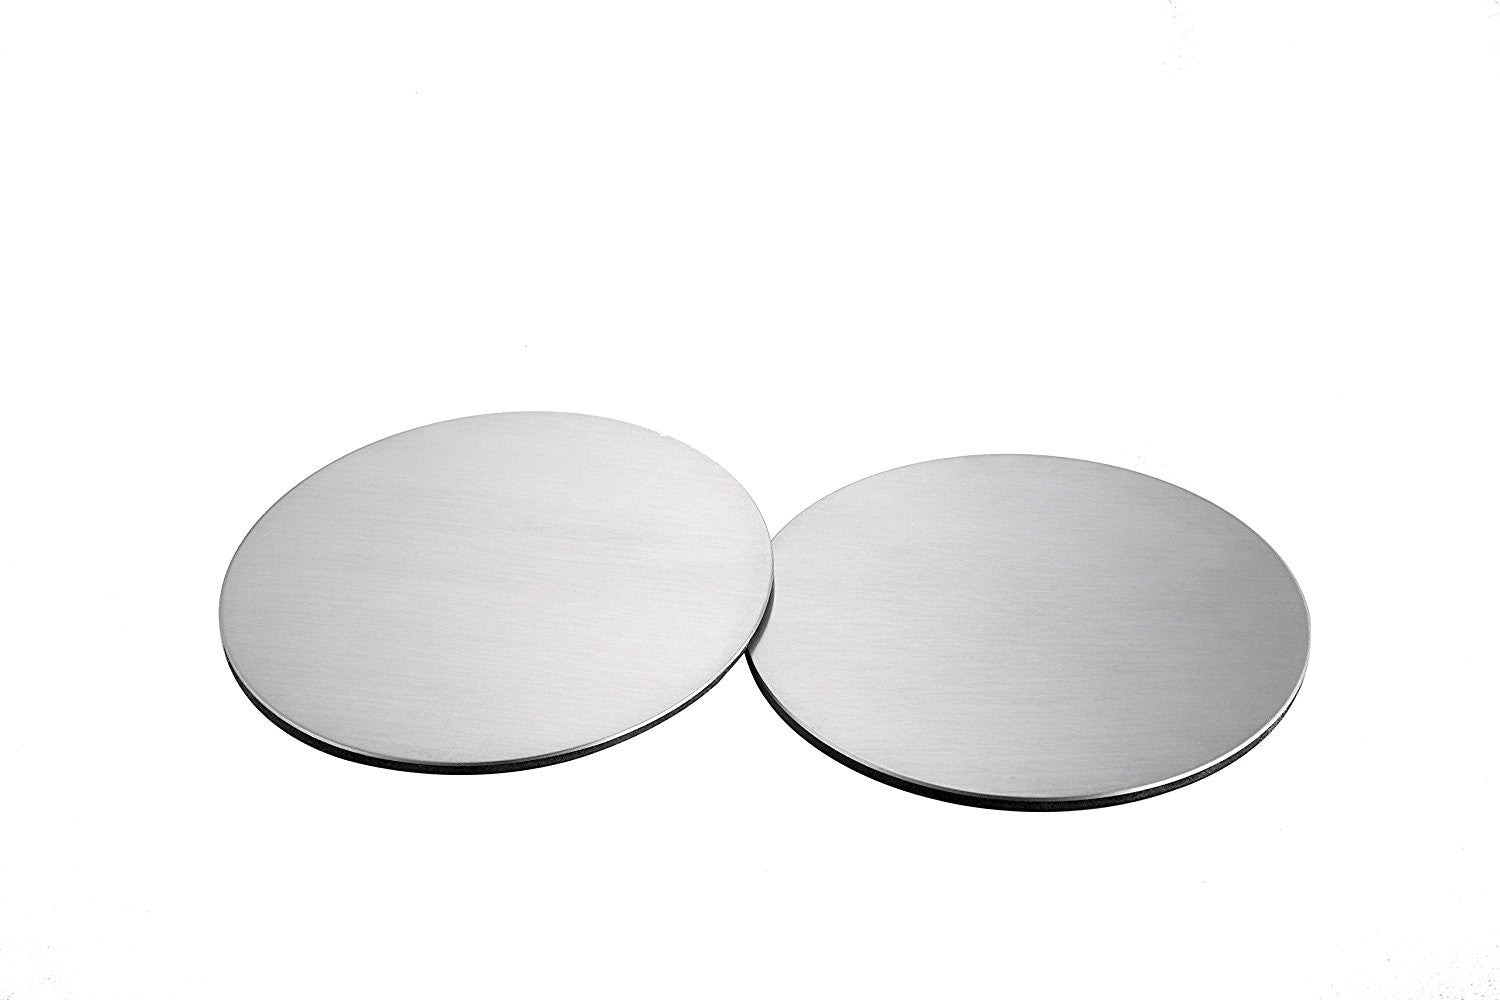 Protective Wholesale Blank Coasters For The Dining Table 